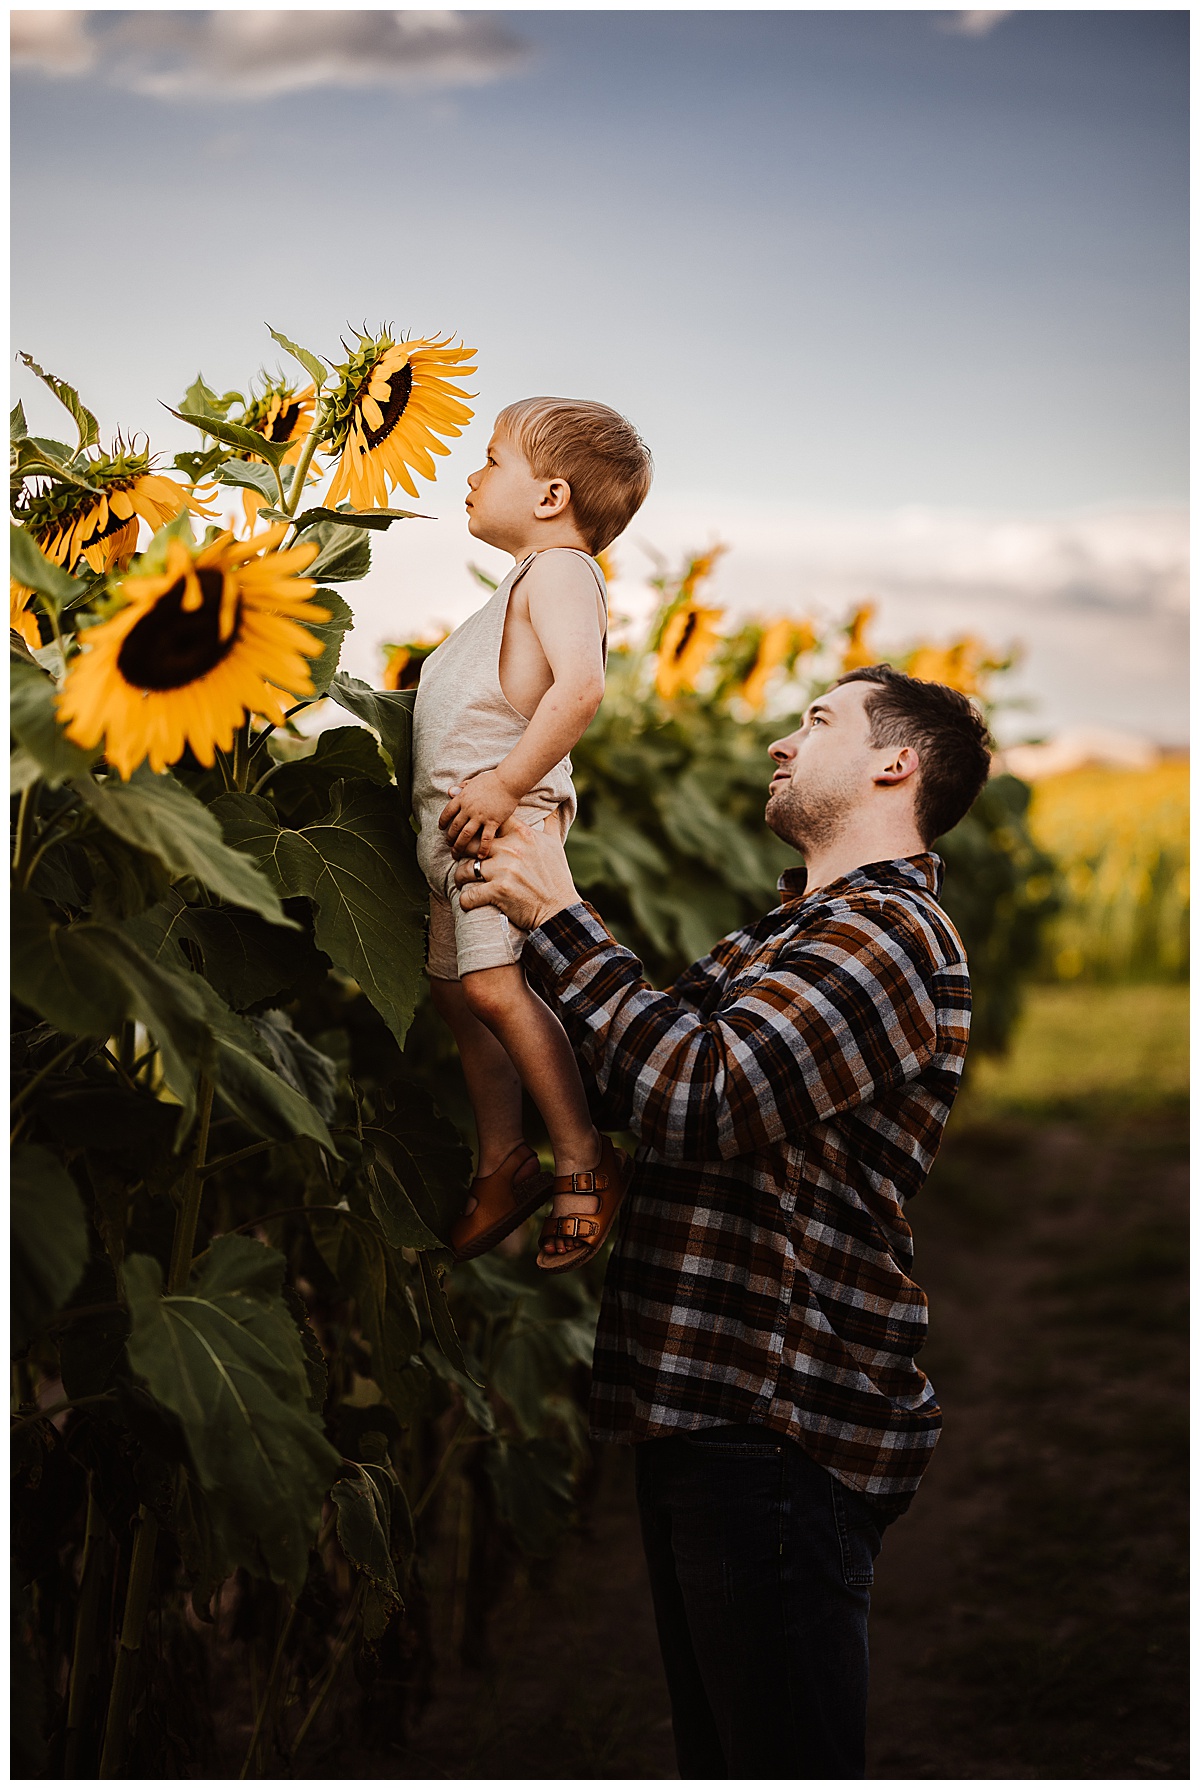 Dad holds up son in Sunflower Field 